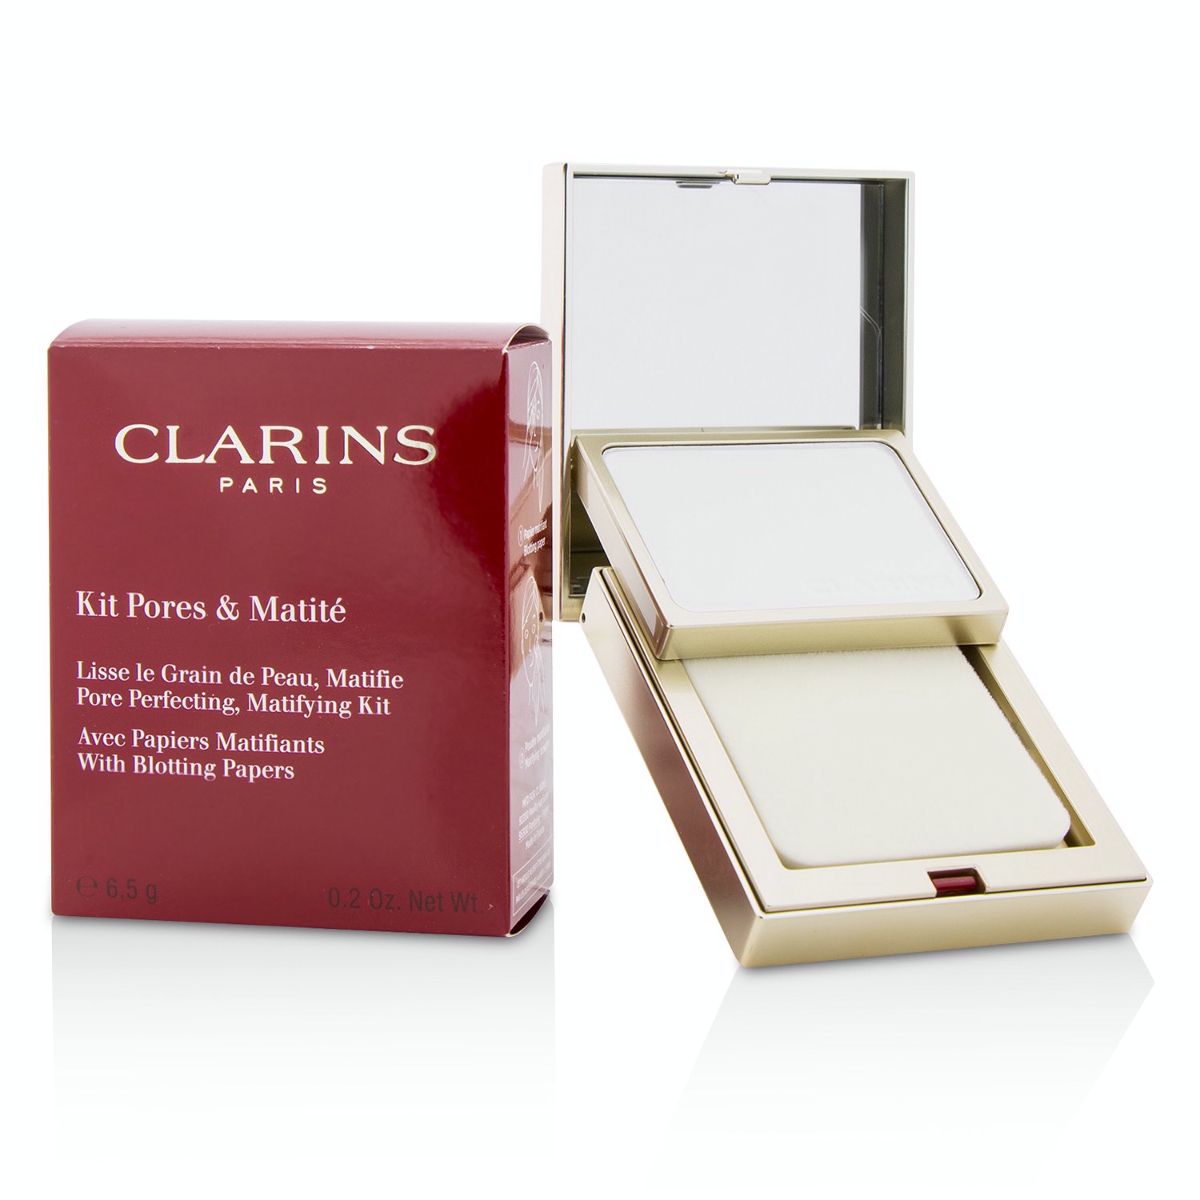 Pore Perfecting Matifying Kit with Blotting Papers Clarins Image